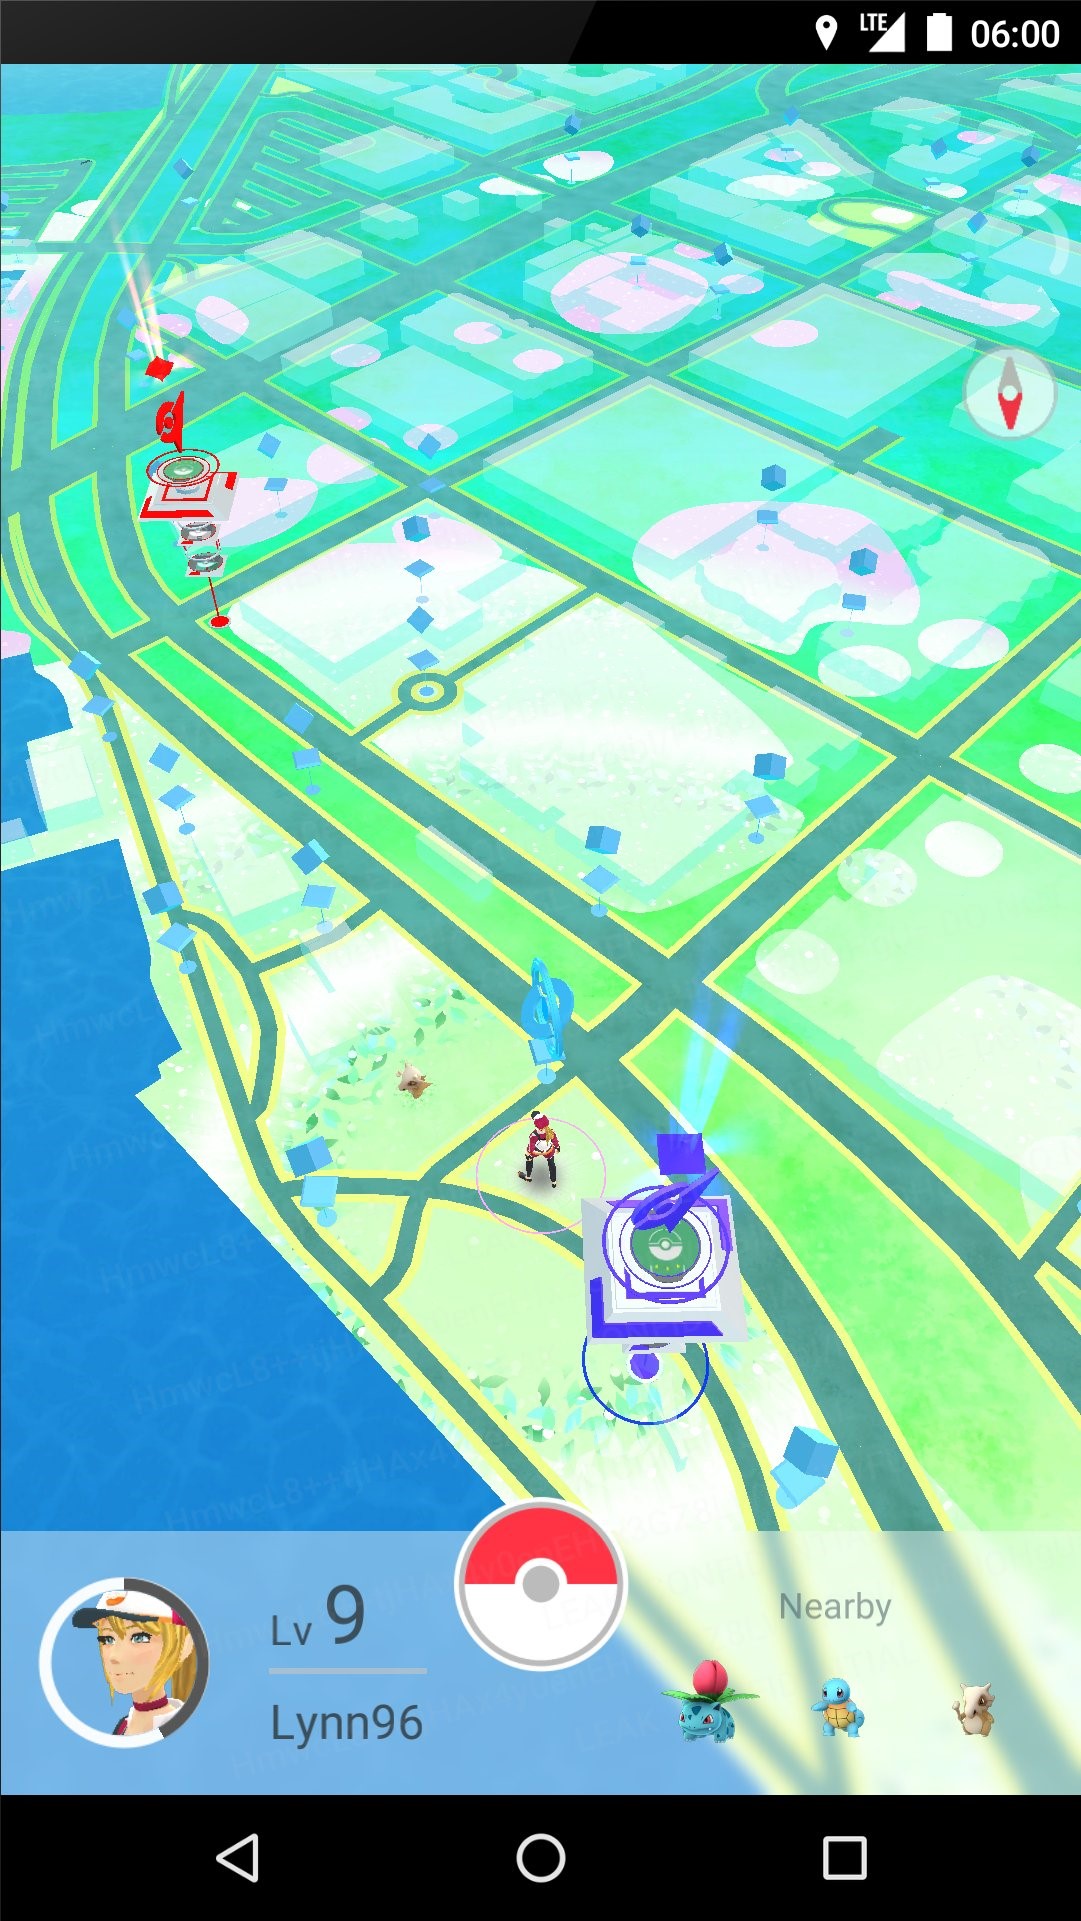 A Whole New World: Explore your town in a light you’ve never seen before. Pokestops and gyms are located at interesting locations in your town.